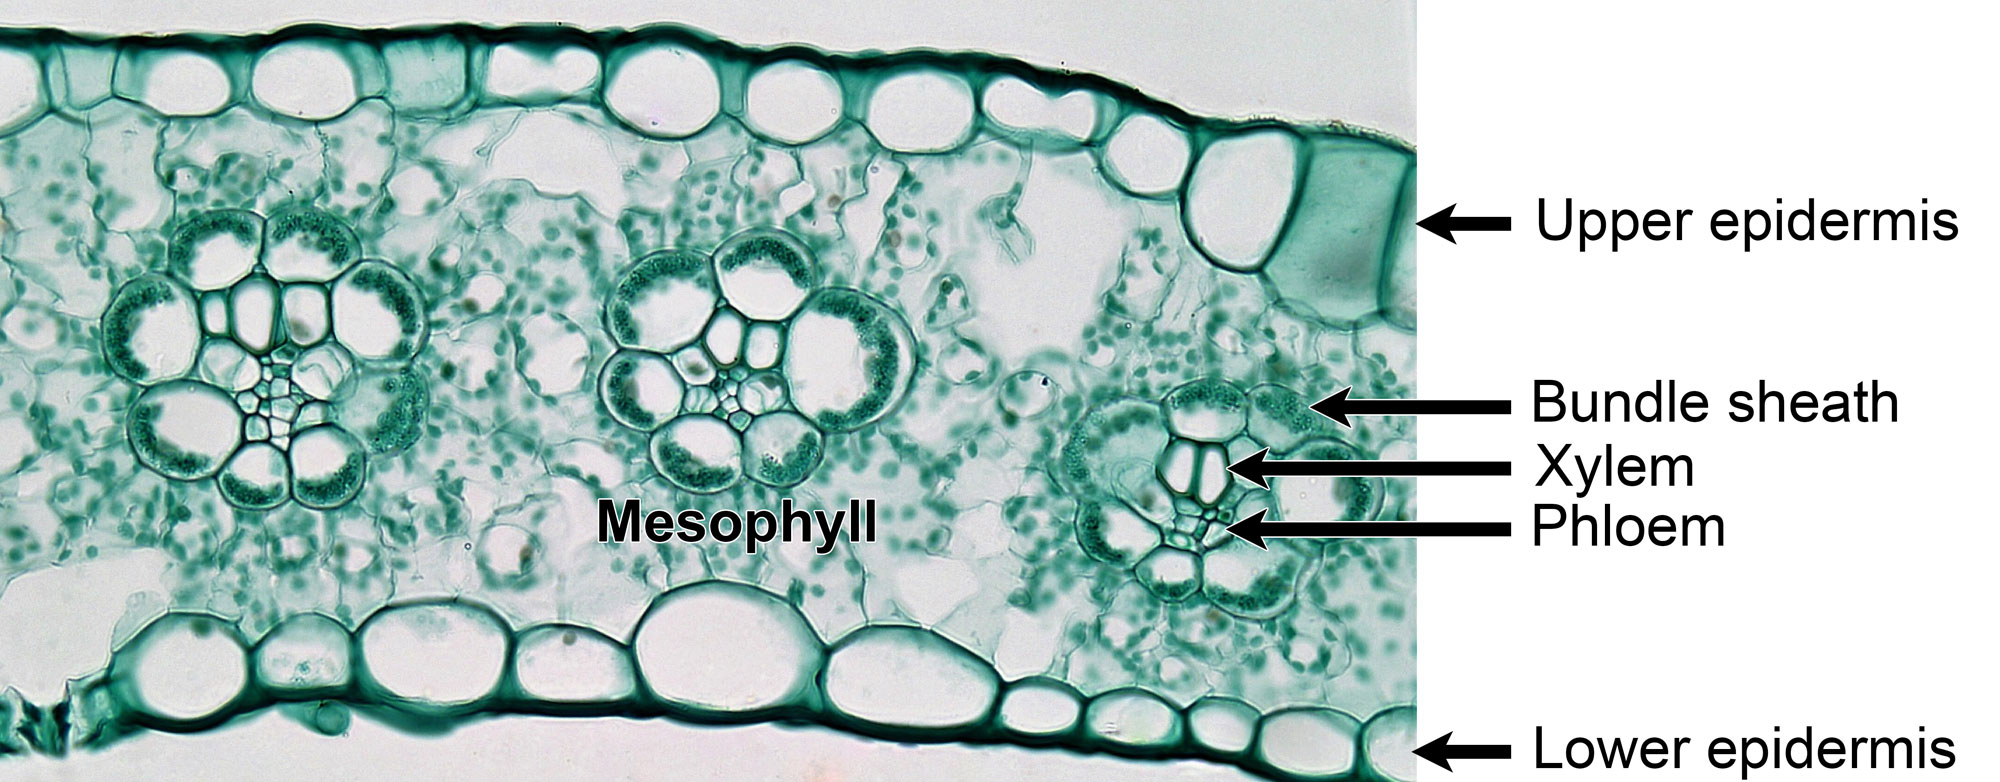 Photograph of a stained cross section of a maize leaf. The section shows the upper epidermis, the lower epidermis, three vascular bundles, and mesophyll arranged concentrically around the bundles. The epidermis, bundle sheath, xylem, phloem, and mesophyll are labeled.